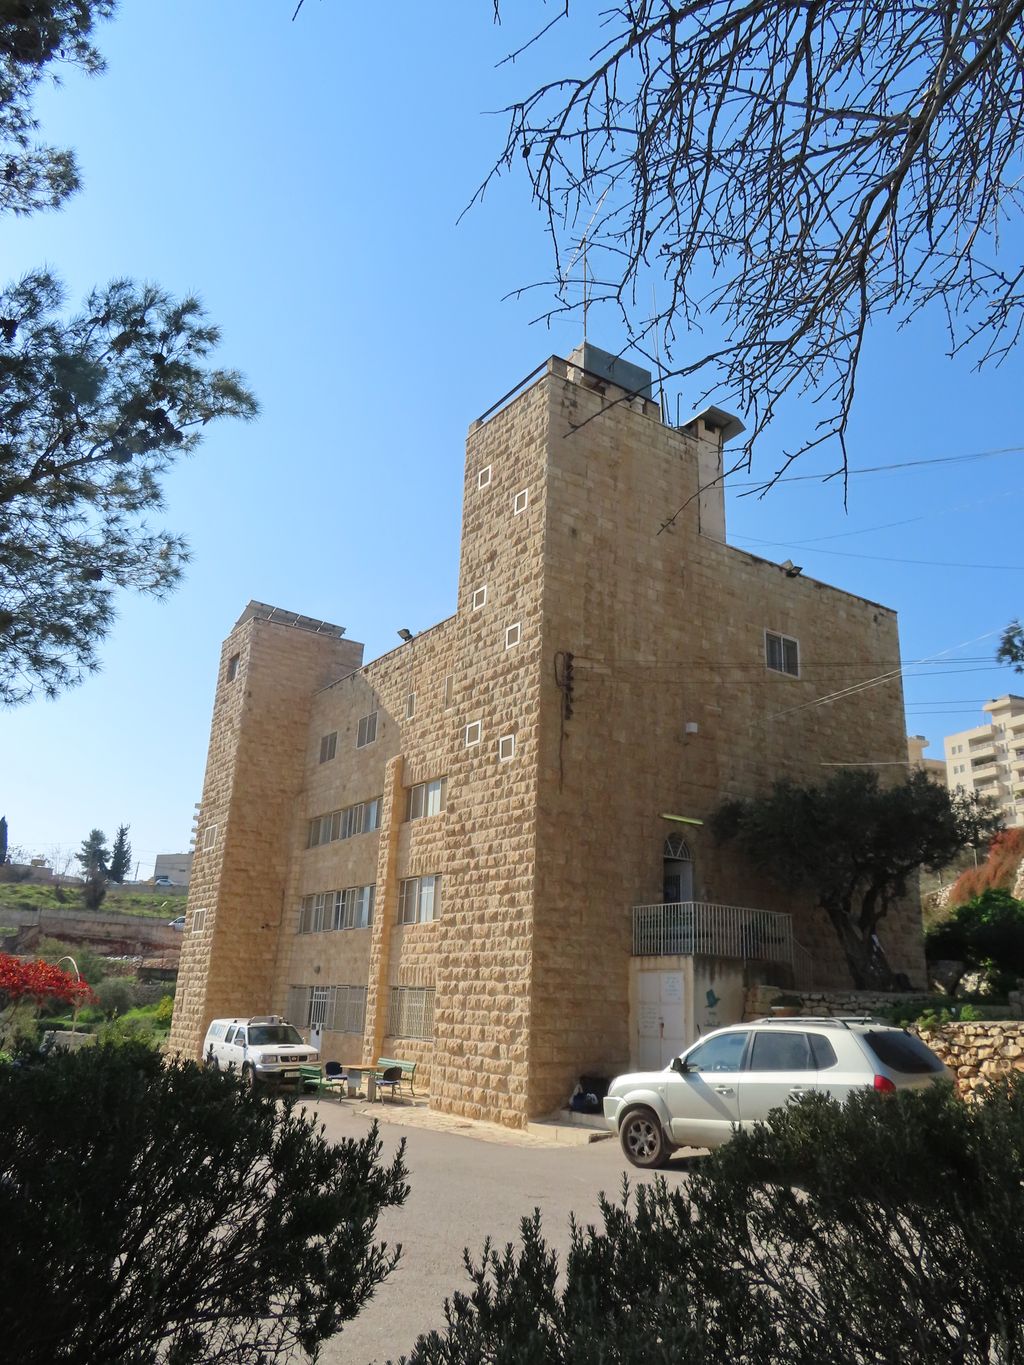 Palestine Museum of Natural History